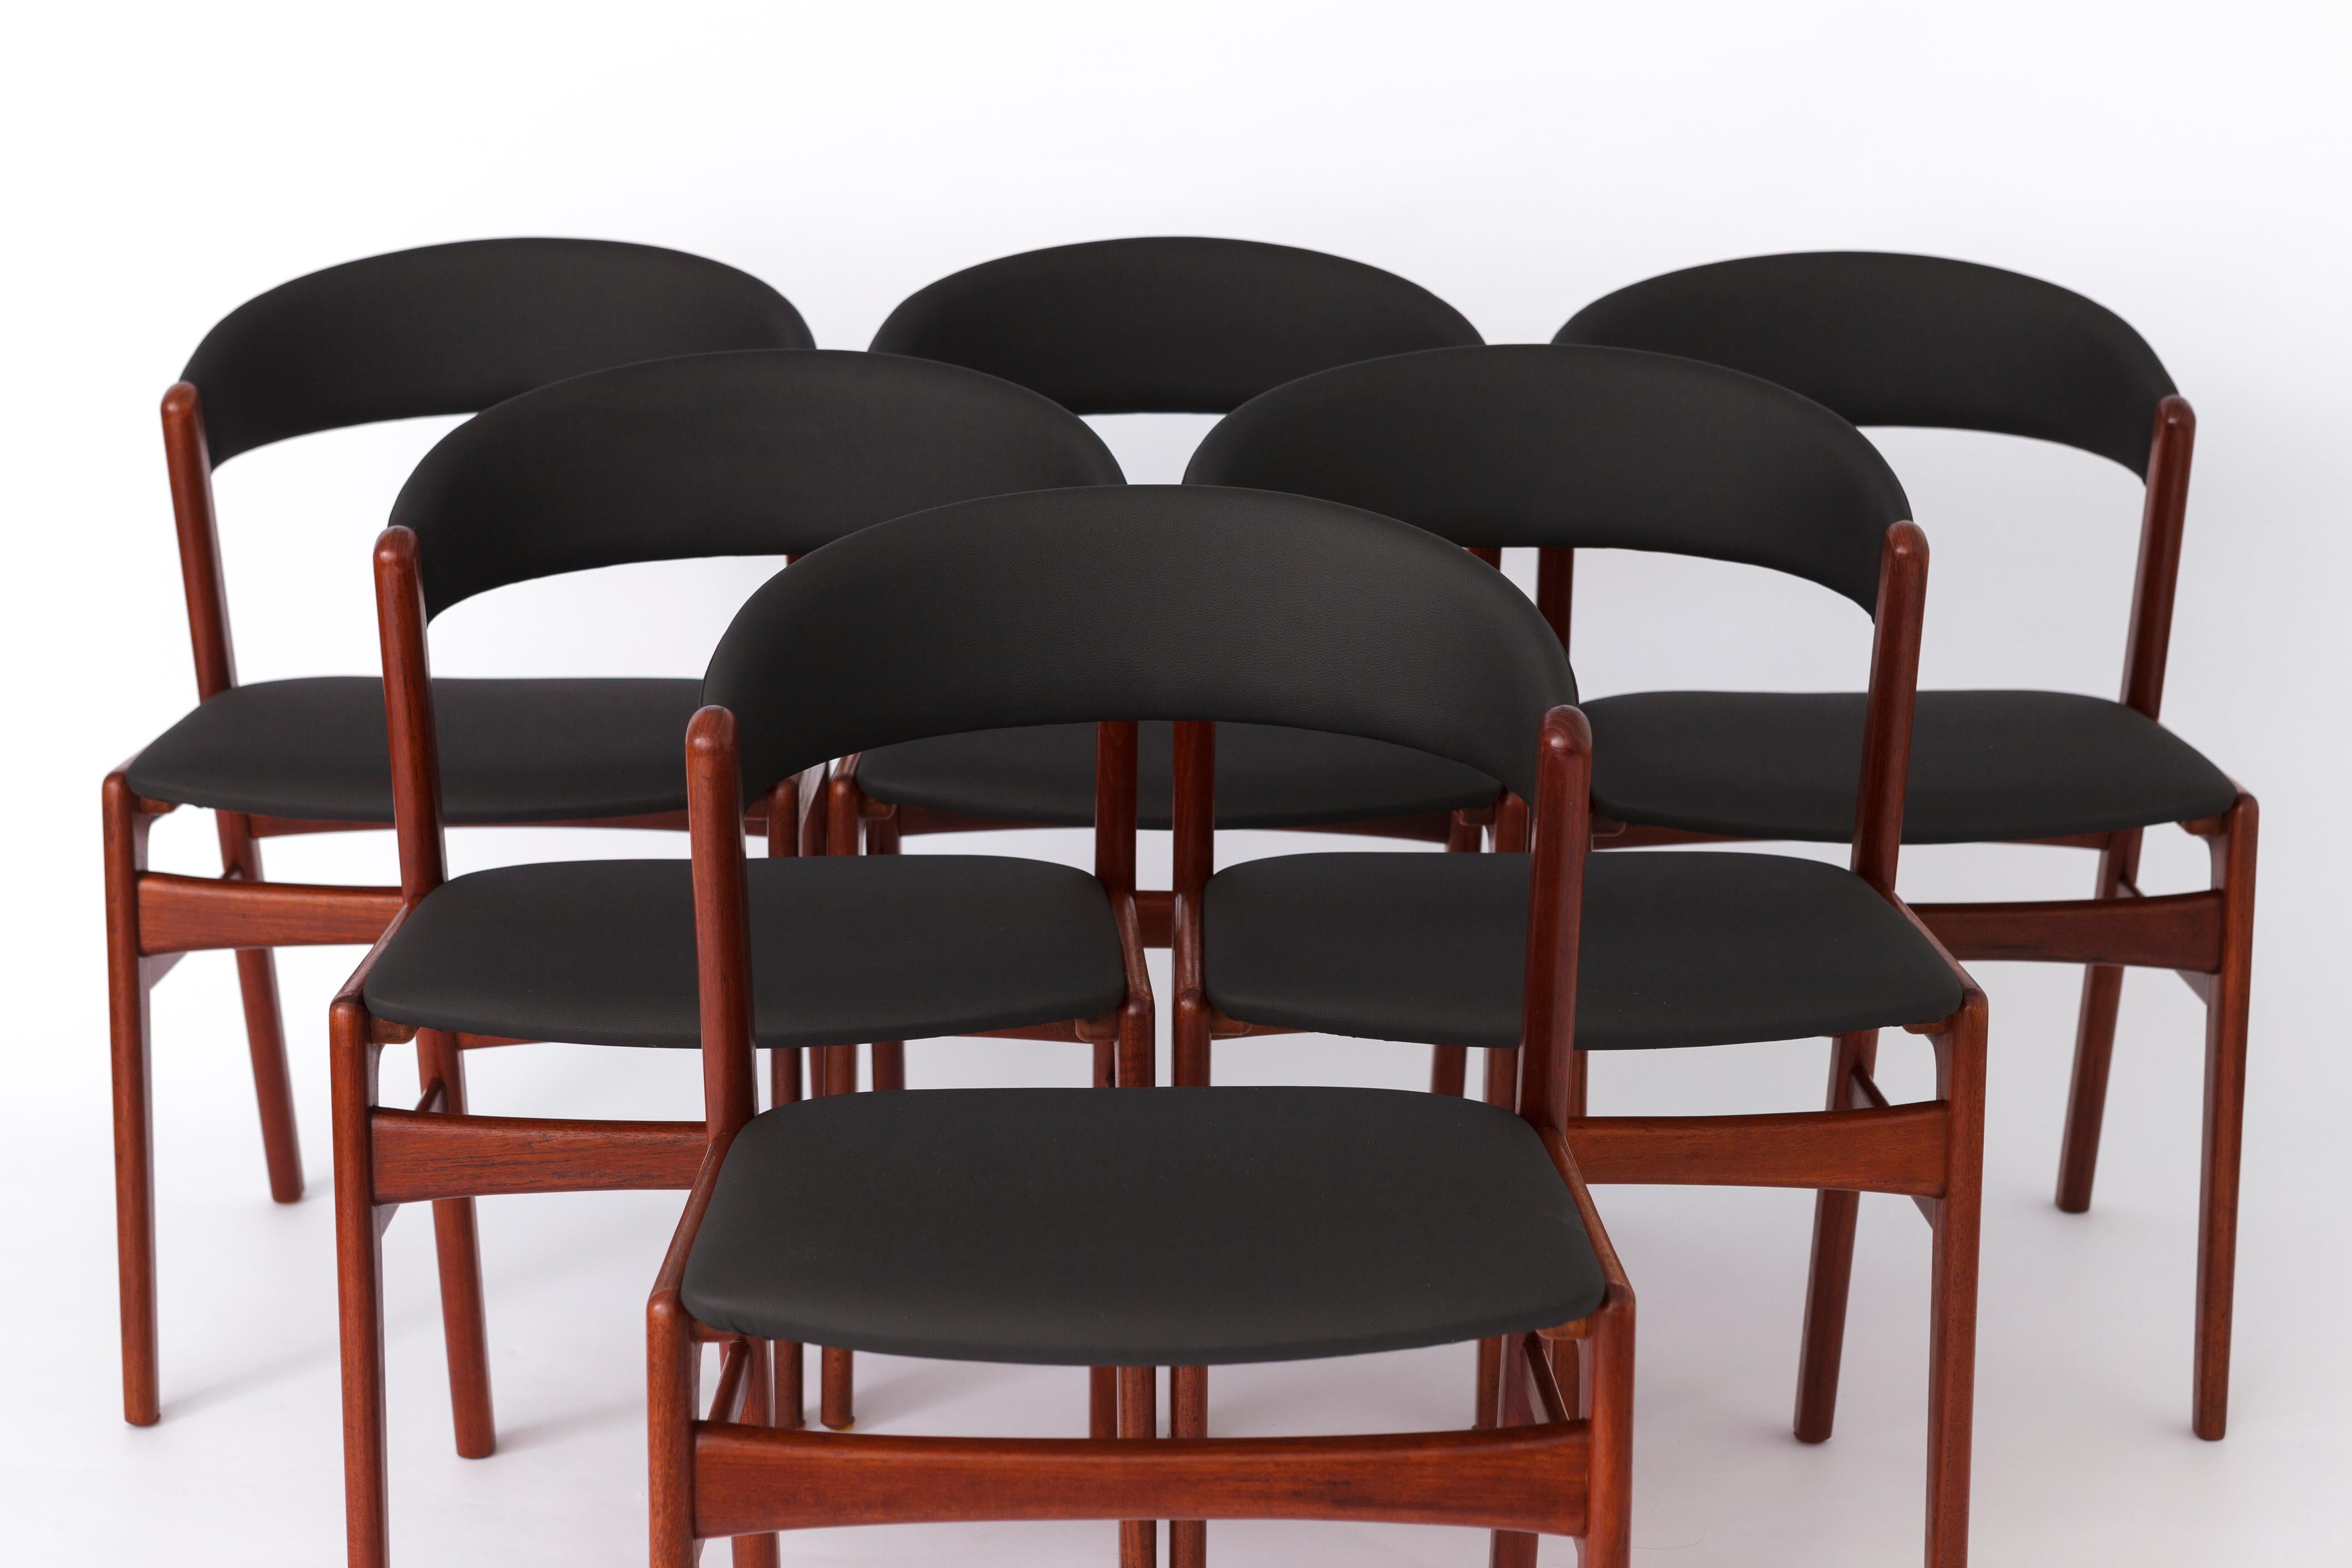 Set of 6 vintage dining chairs made by manufacturer DUX, Sweden in the 1960s. 
Model name: Ribbon Back, due to the characteristic backrest shape, which reminds to a ribbon. 
Displayed price is for a set of 6. 

Sturdy teak wood frames. Stable stand.